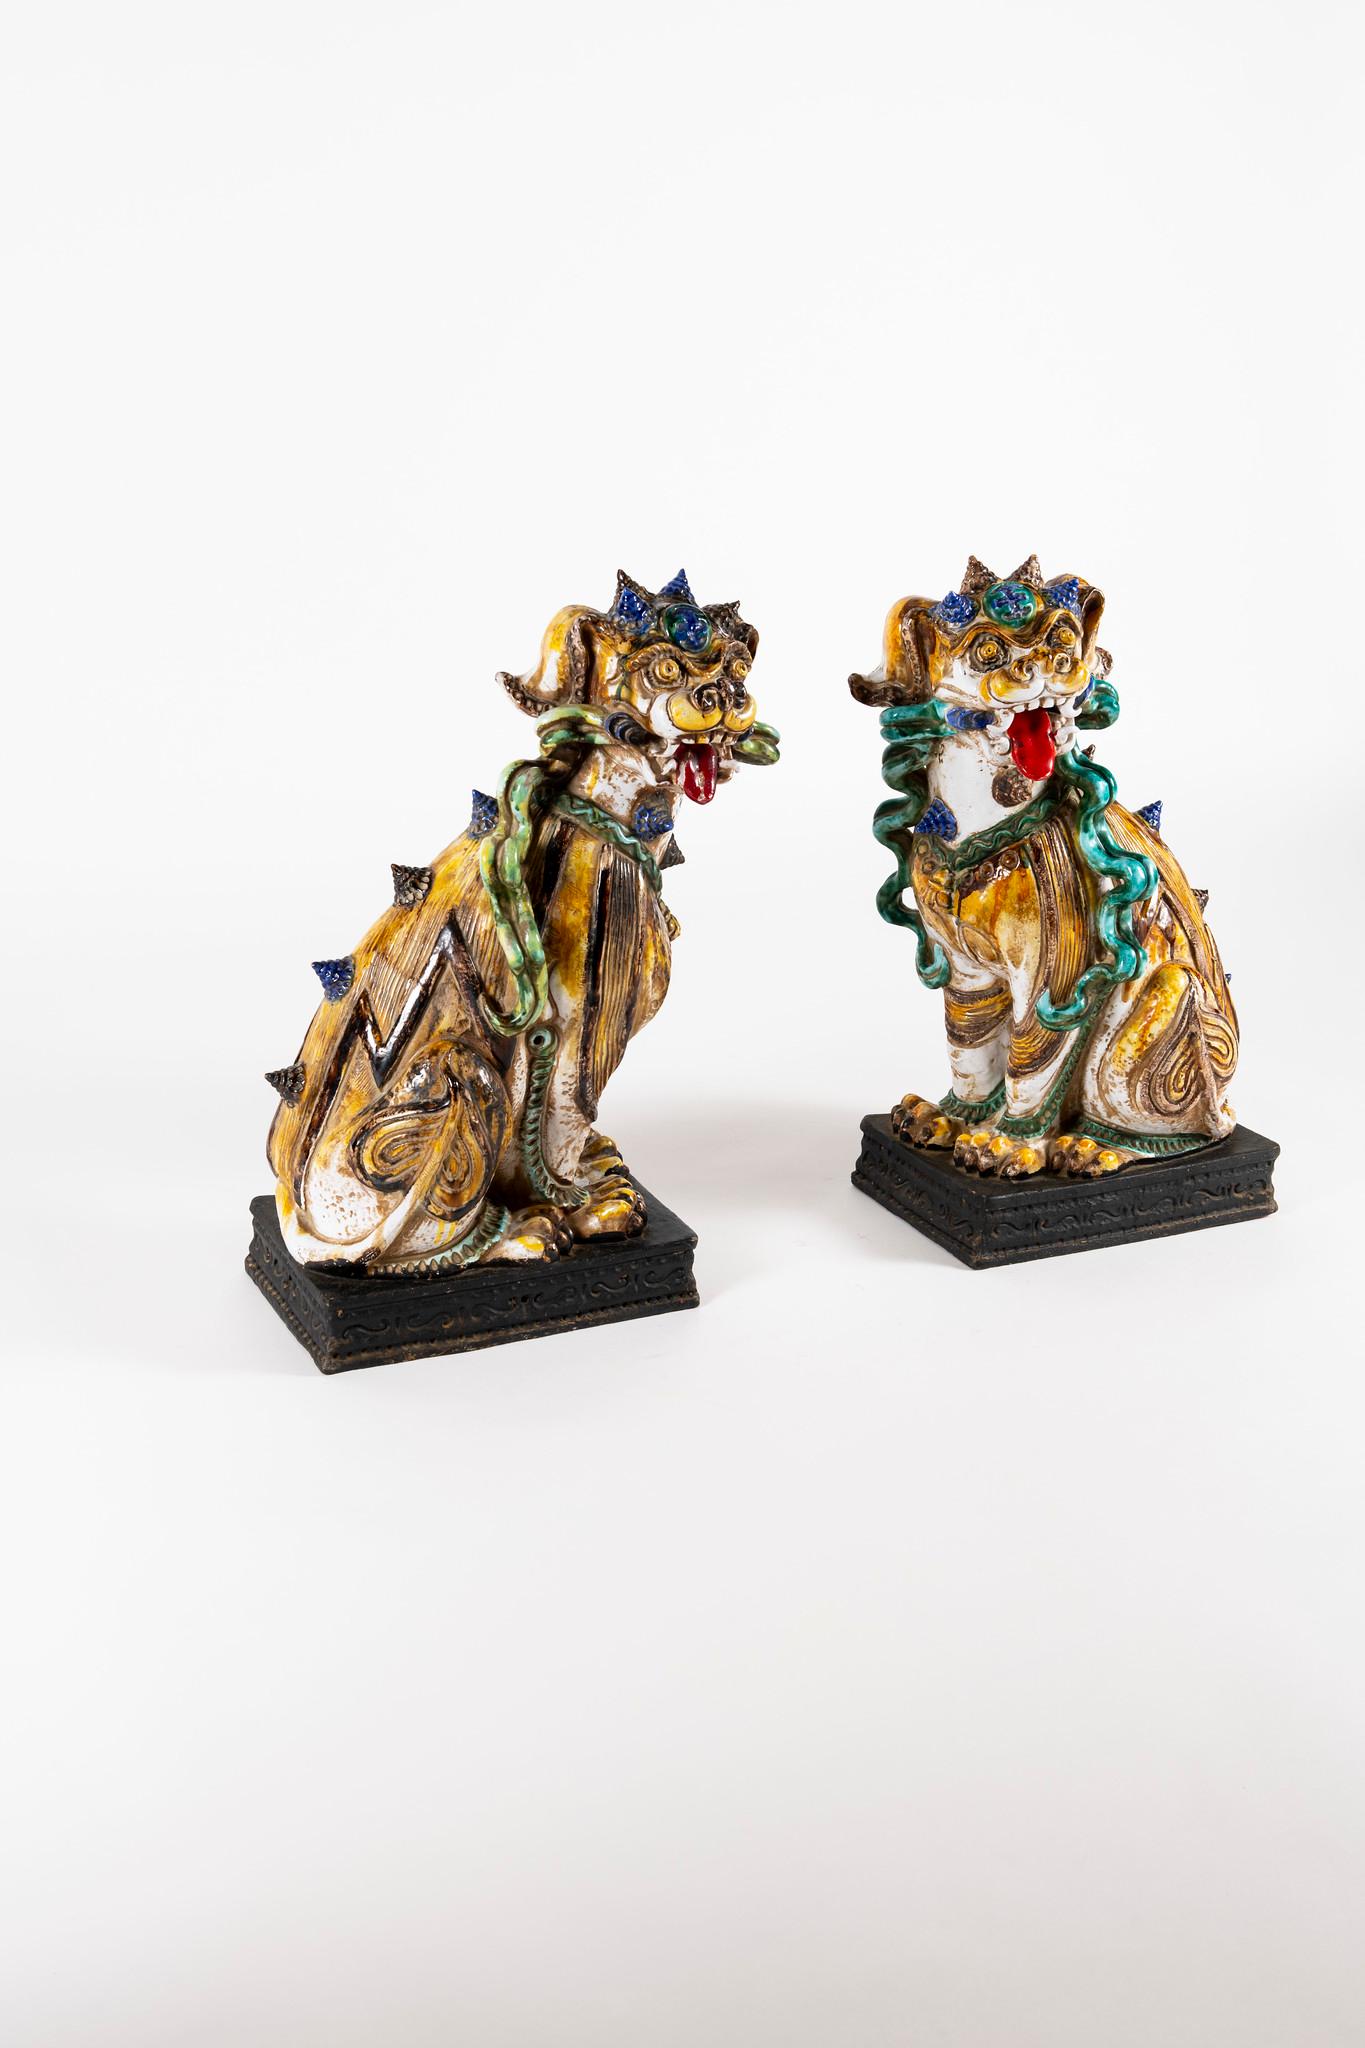 A fabulous large pair of Italian terracotta Fu dogs. The opposing pair are ornately handmade and hand painted with vibrant jewel tones.